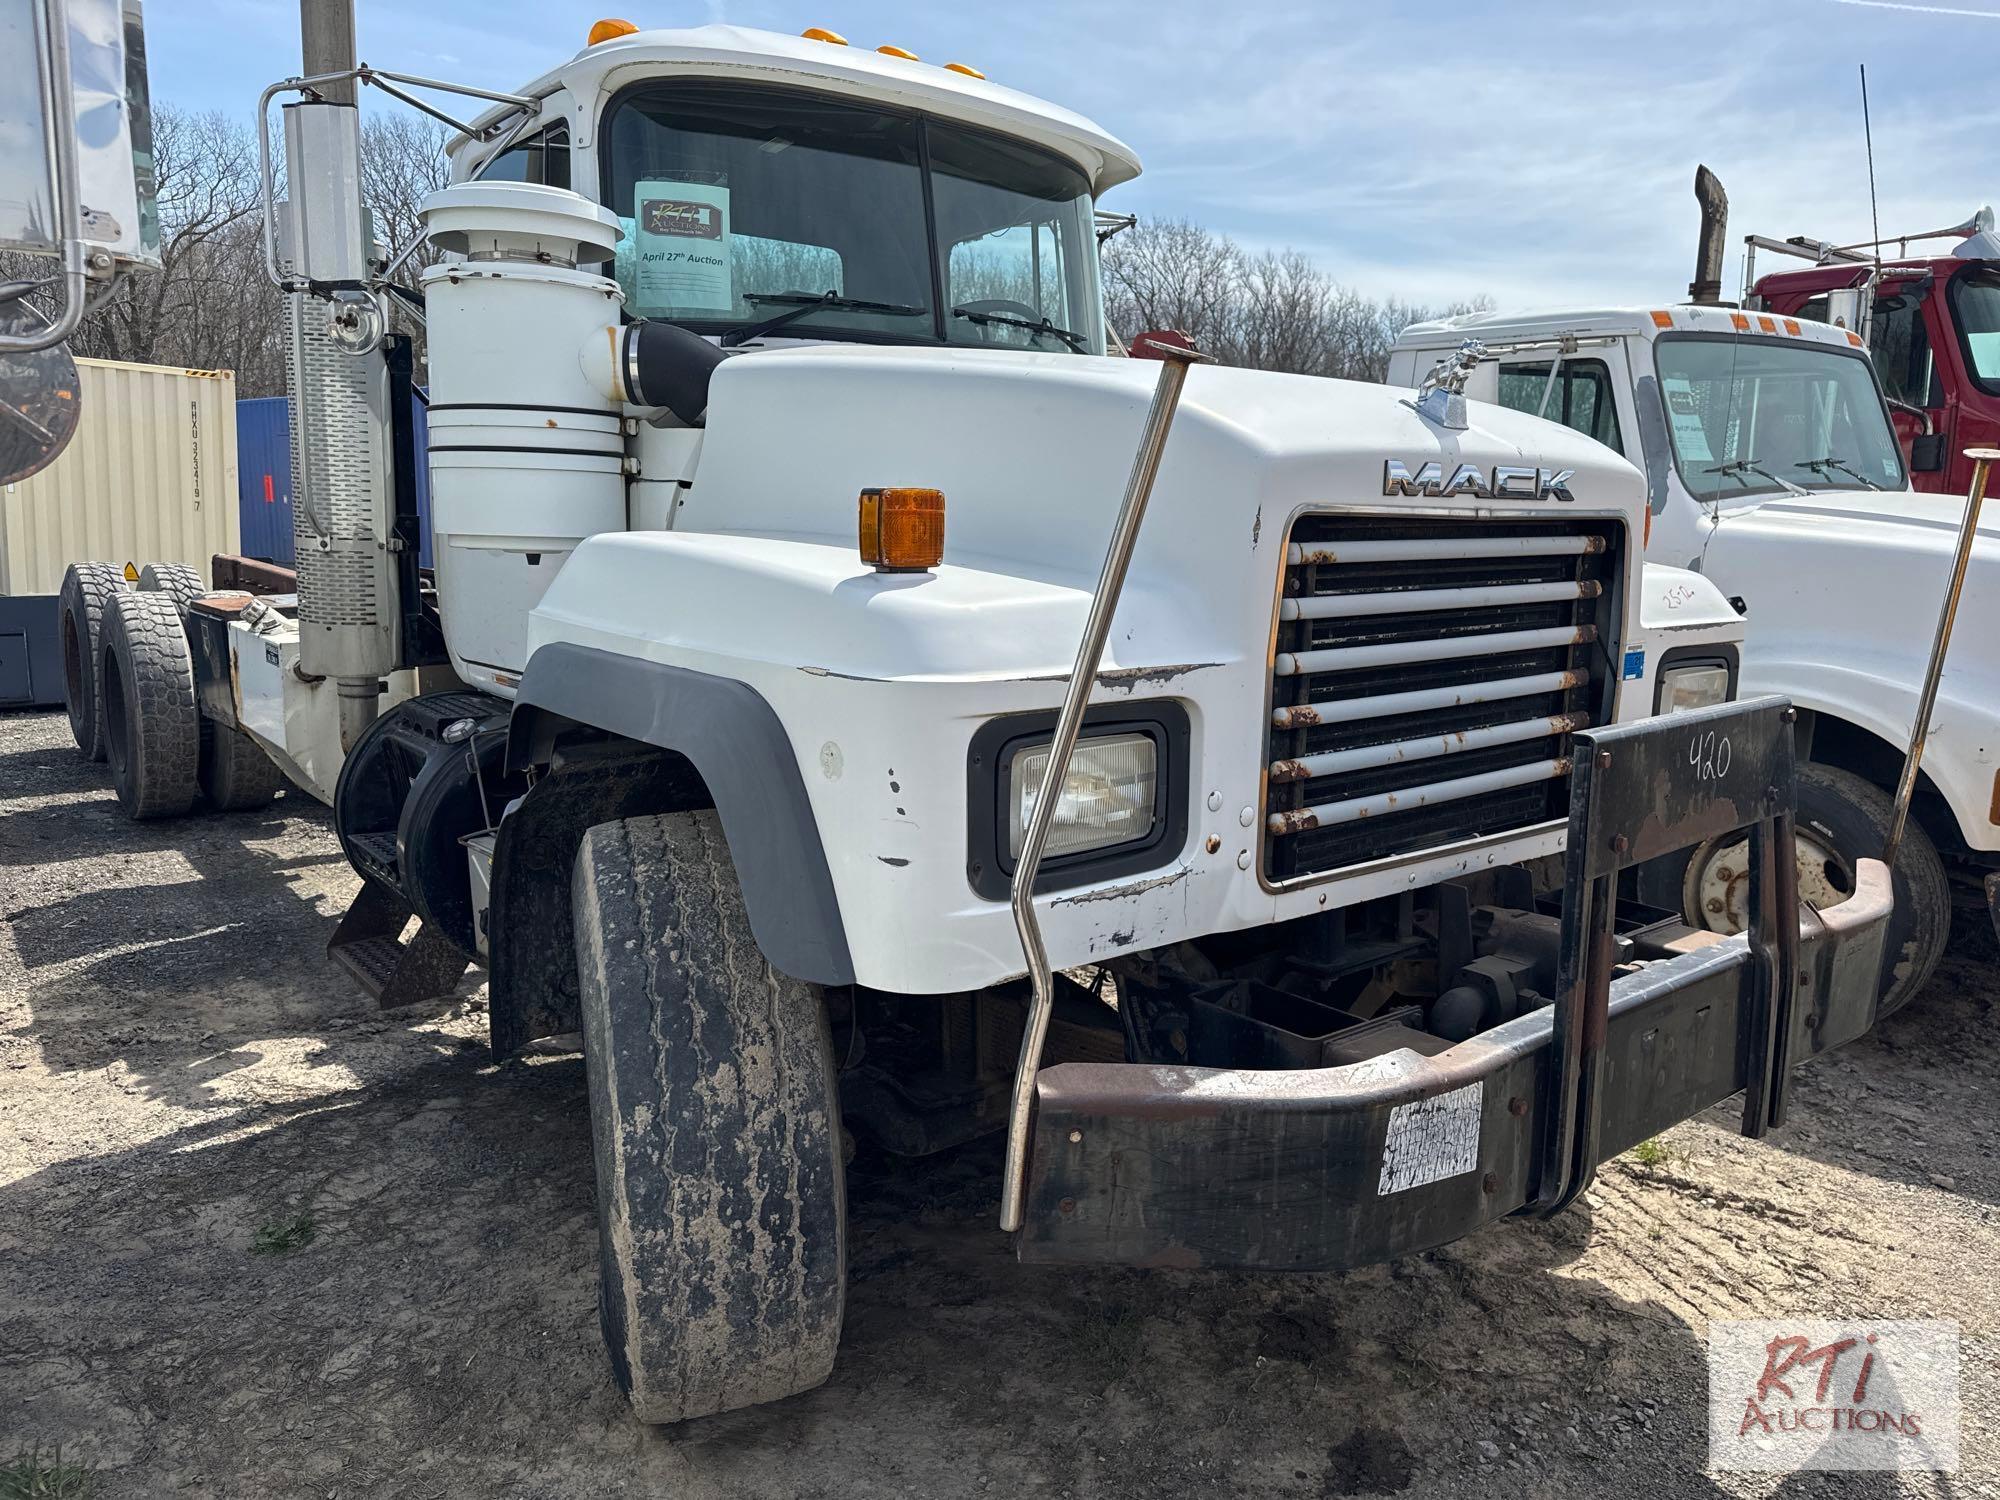 2003 Mack RD690S 10 wheel cab and chassis, heavy spec, Mack EM7300 HP, automatic transmission,